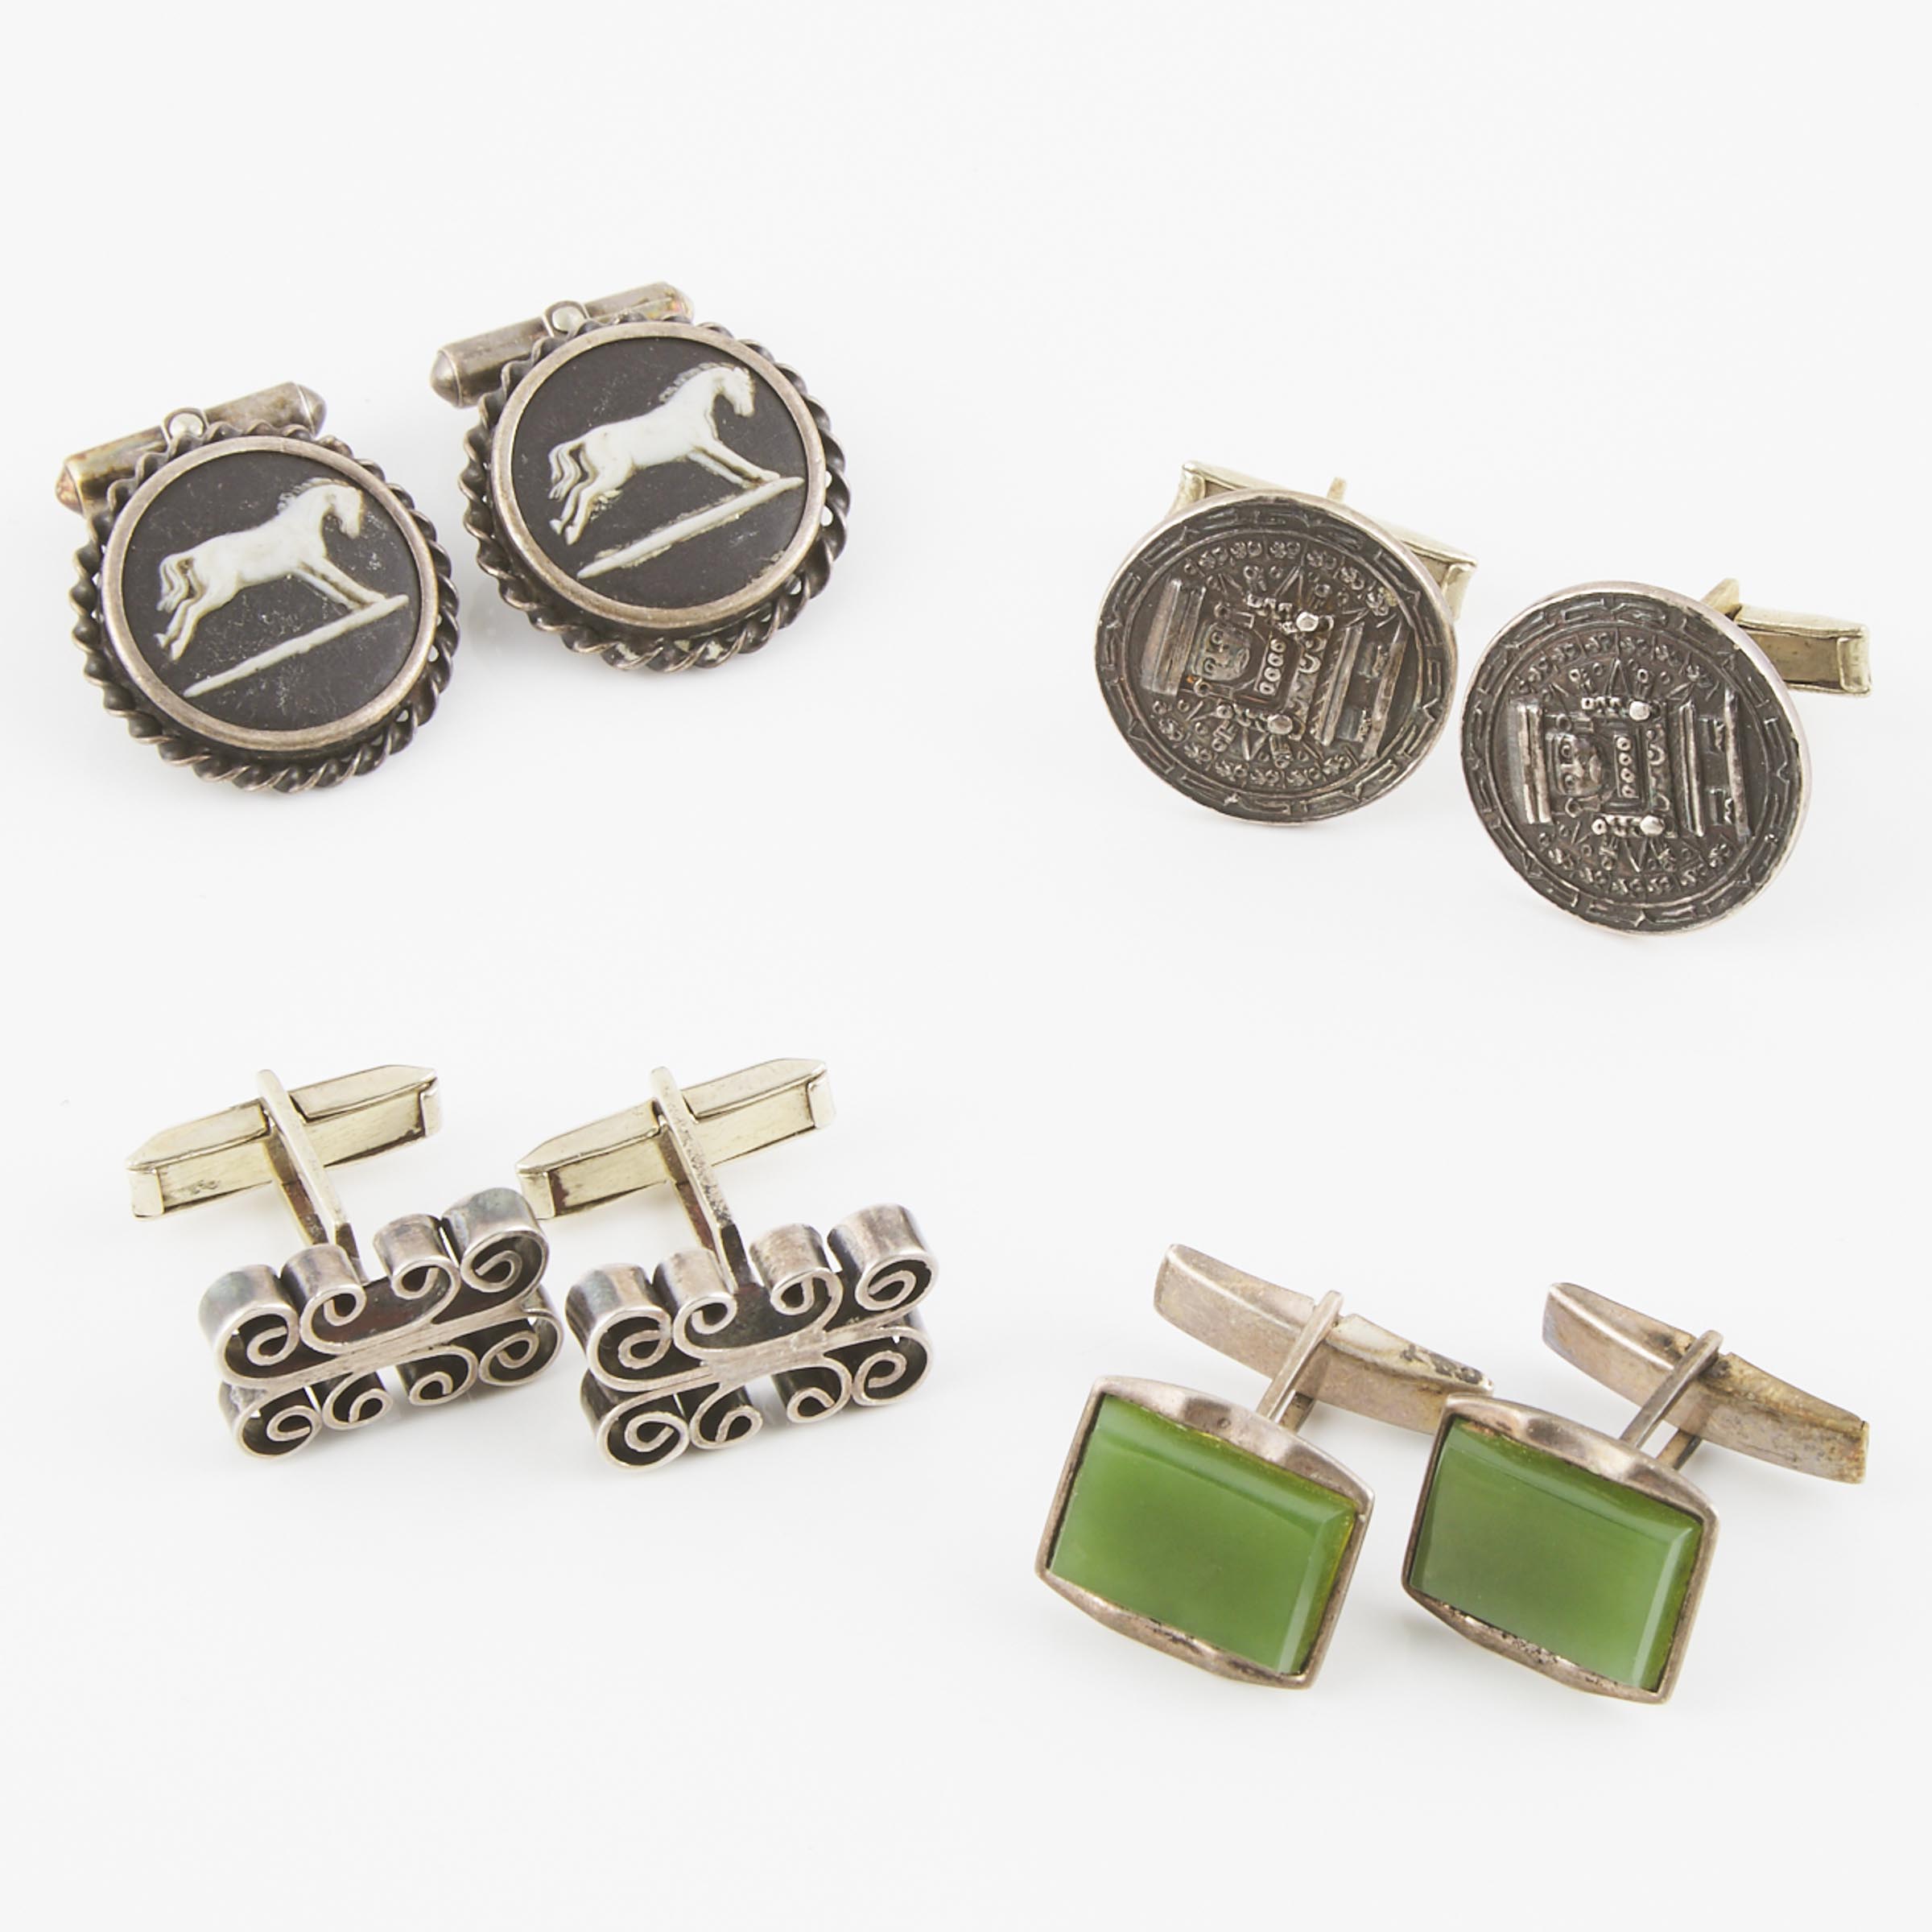 4 x Pairs Of Various Silver Cufflinks 